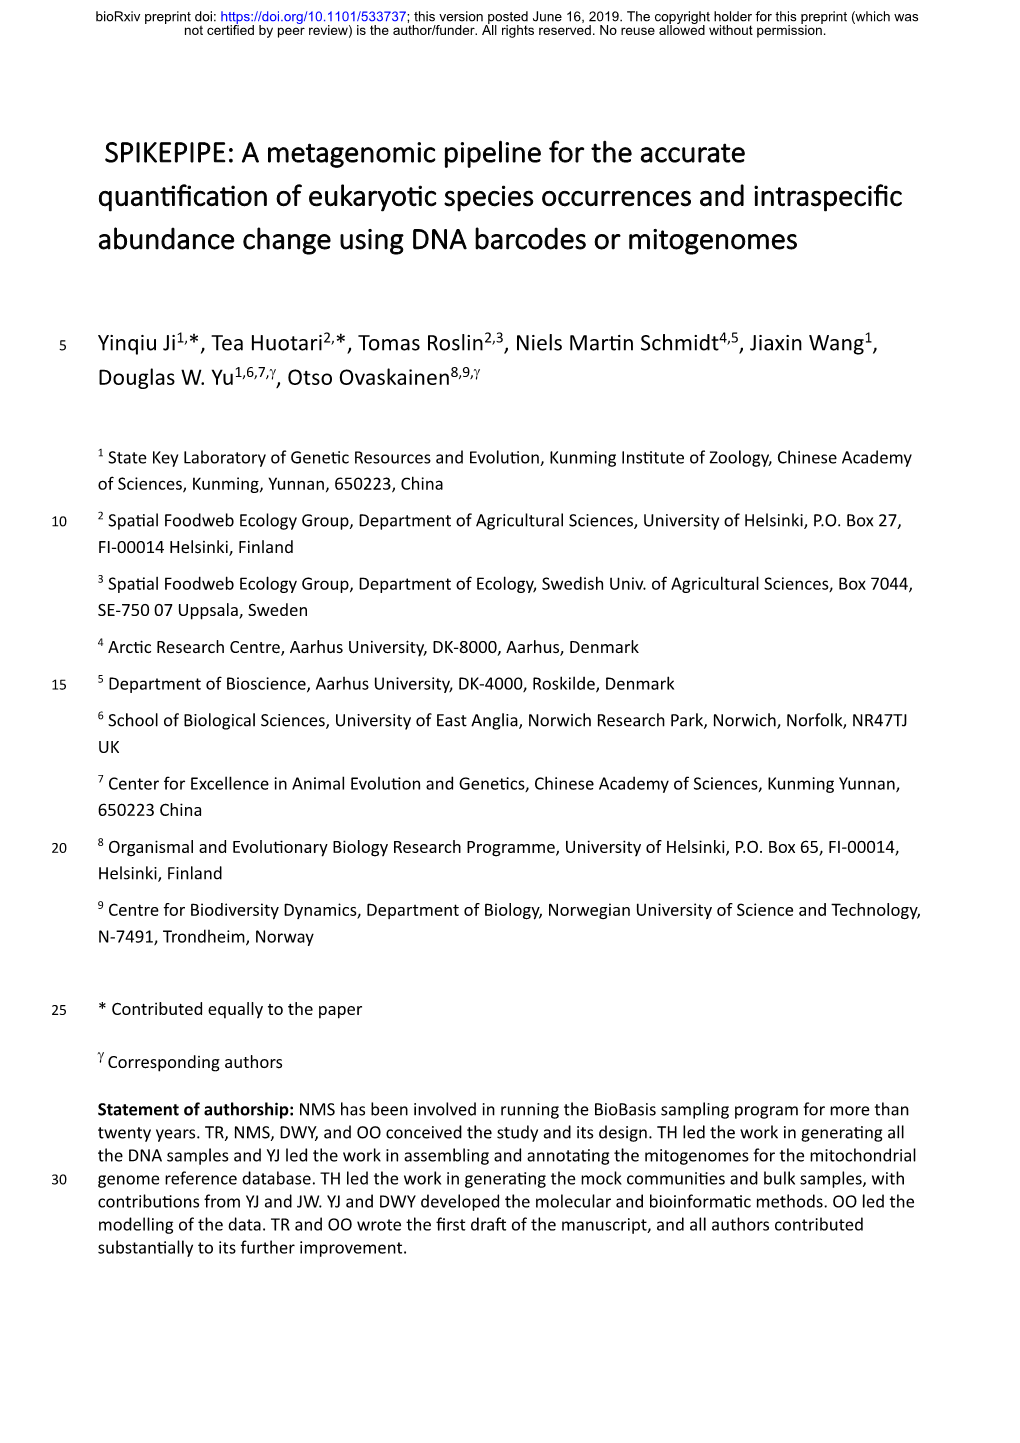 A Metagenomic Pipeline for the Accurate Quantification Of